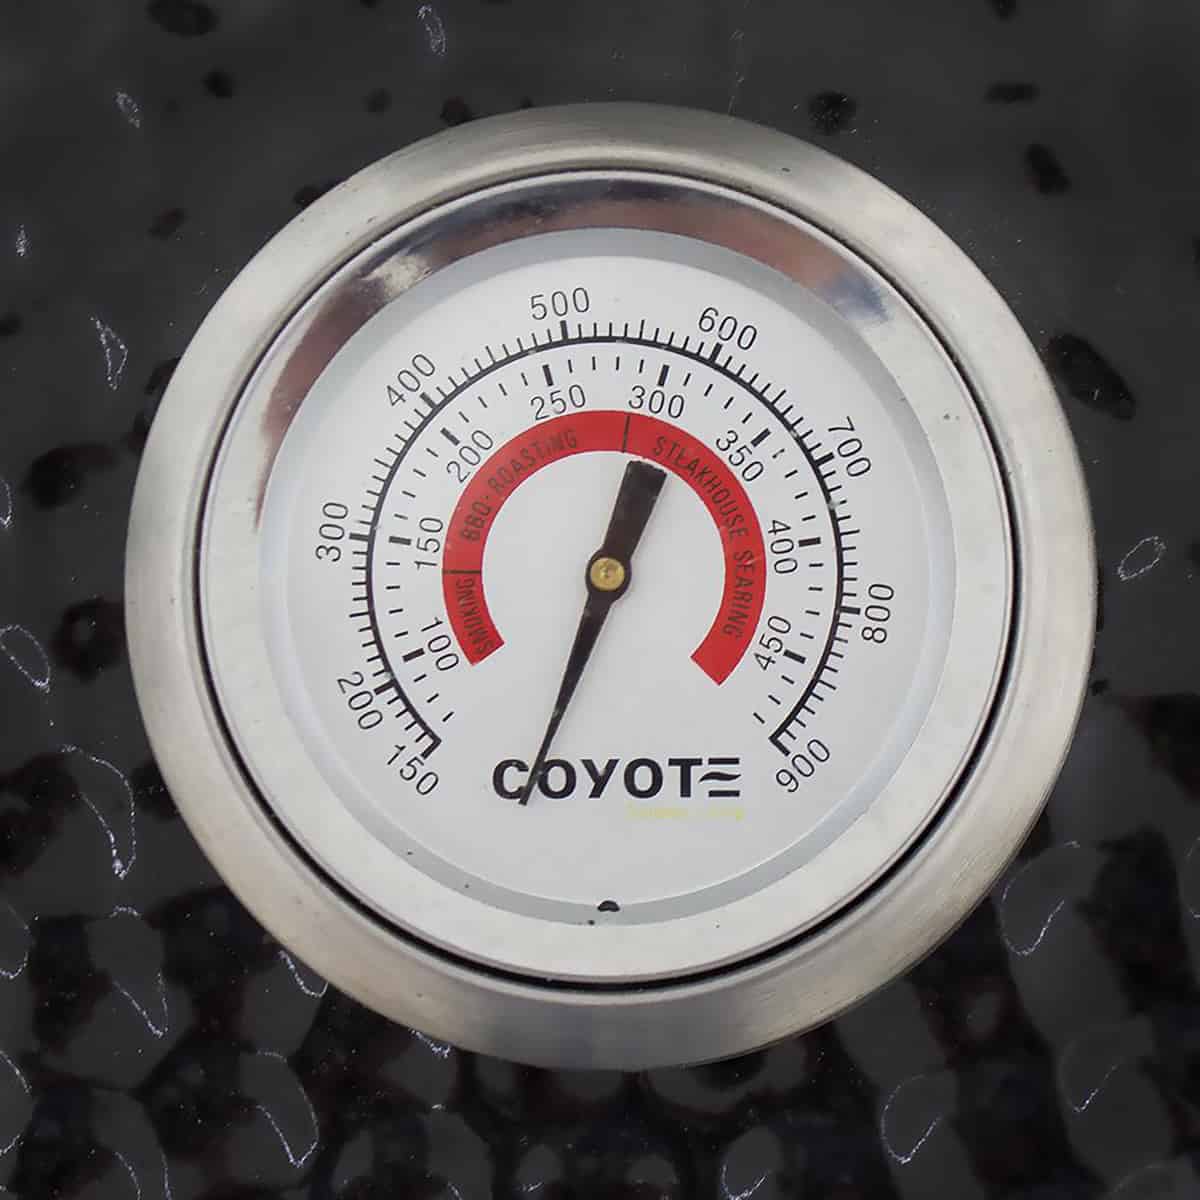 Coyote Asado Ceramic Grill and Smoker Thermometer